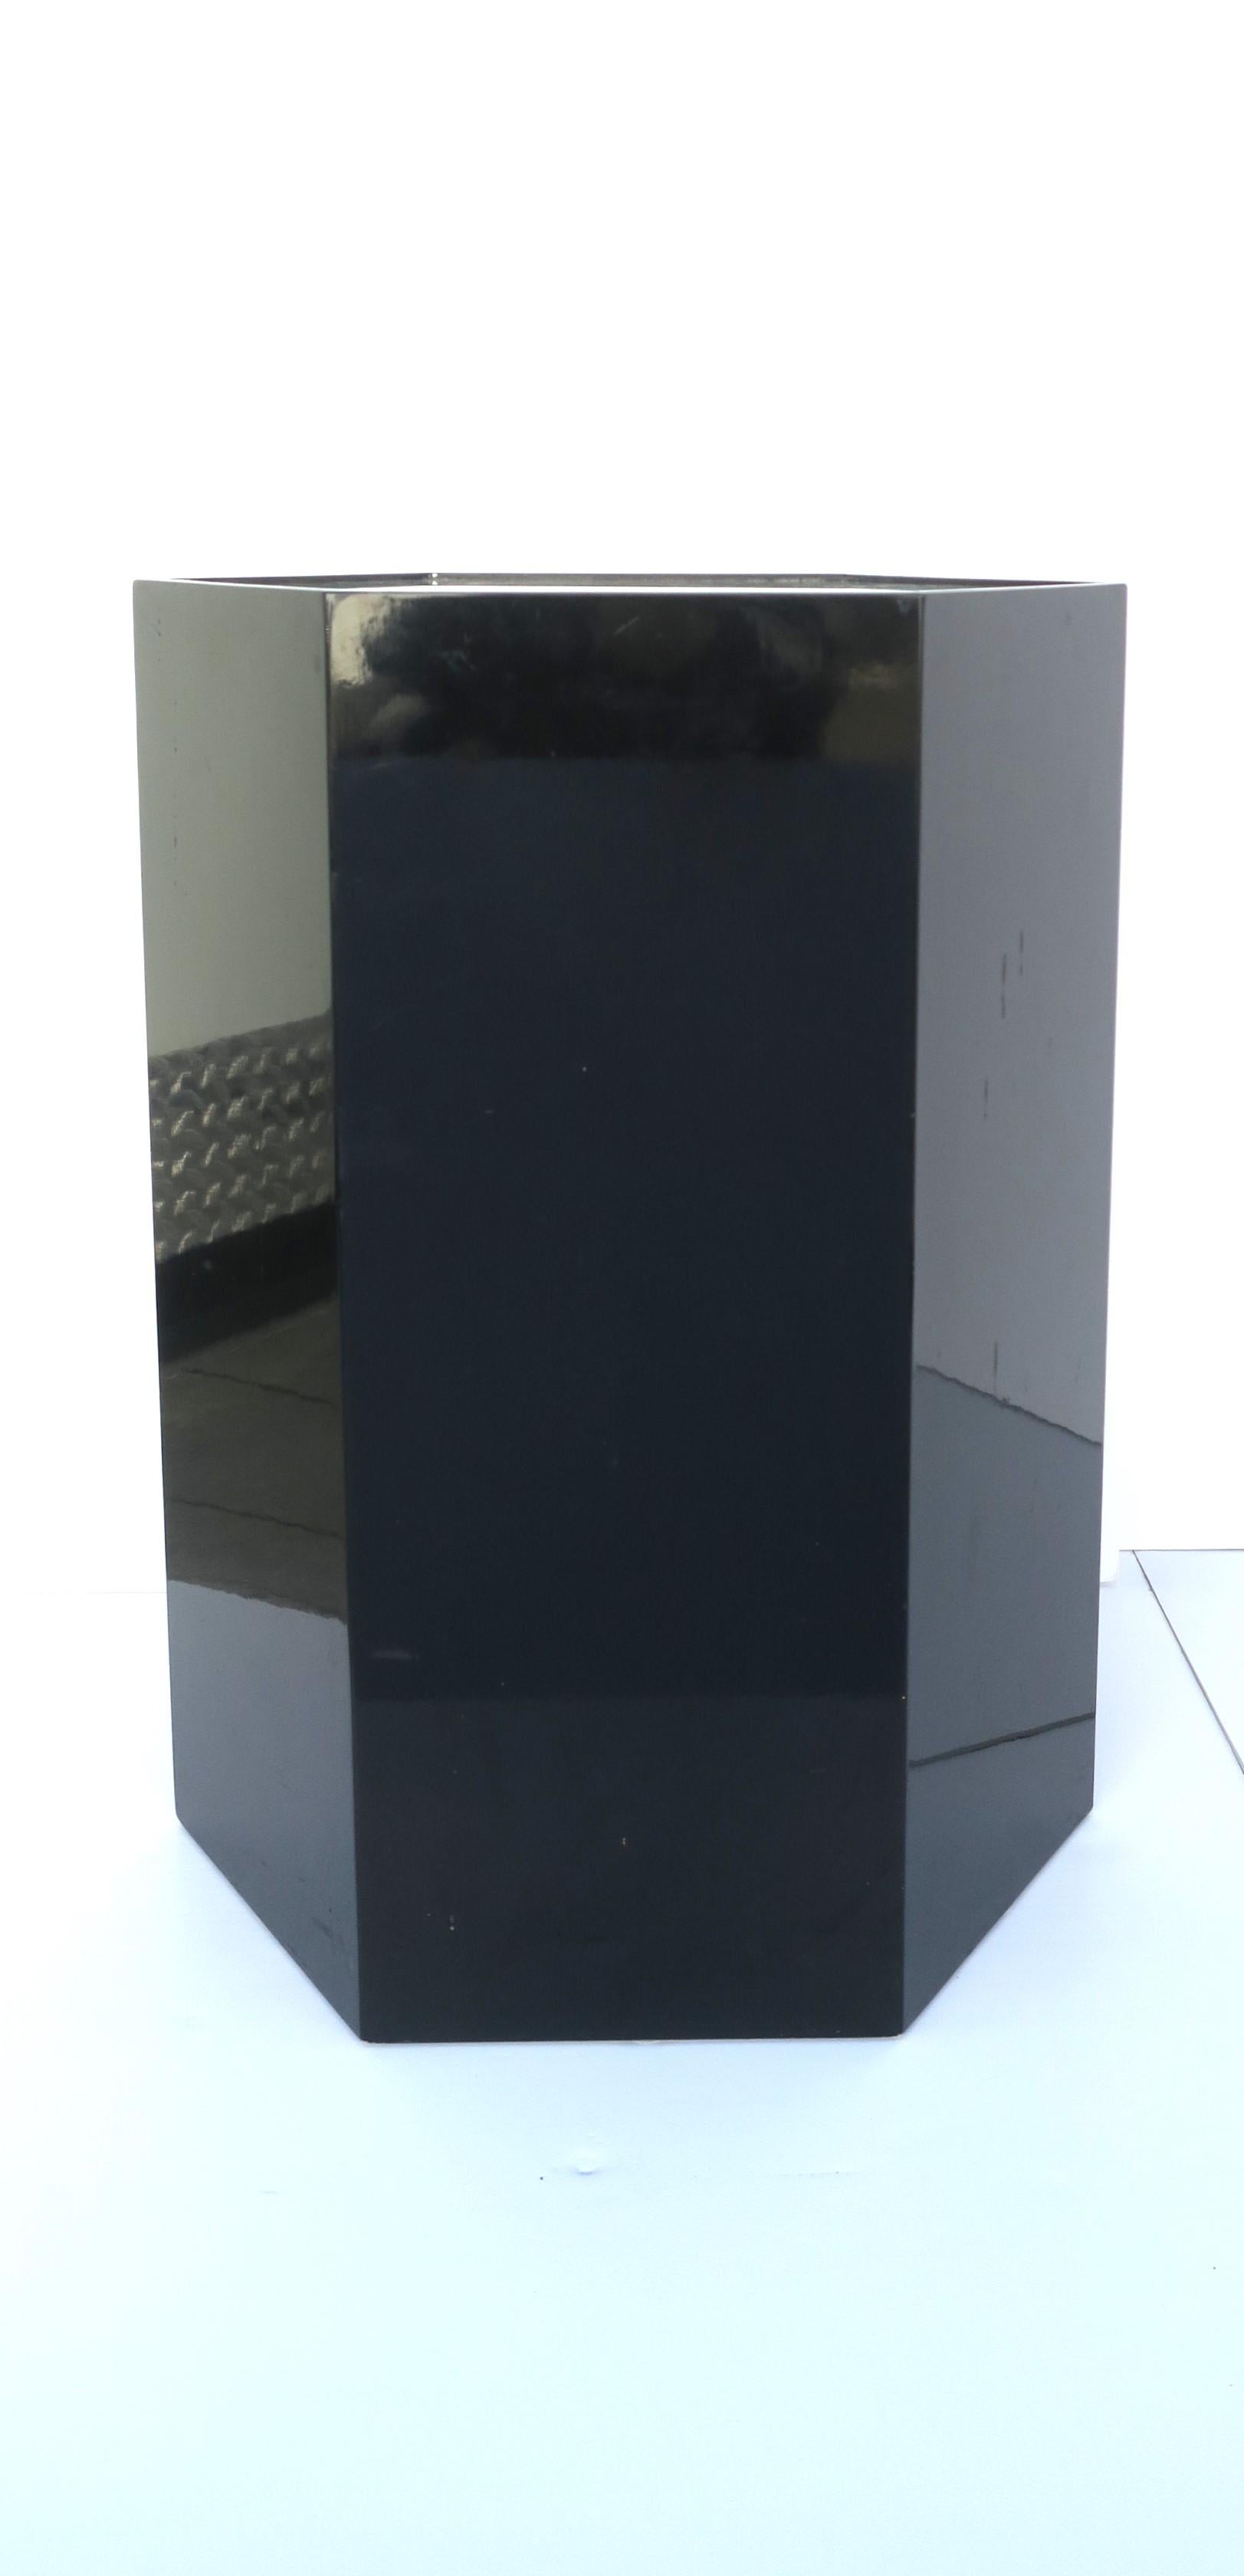 Black Lighted Pedestal Column Pillar Stand or Table, circa 1970s Modern In Good Condition For Sale In New York, NY